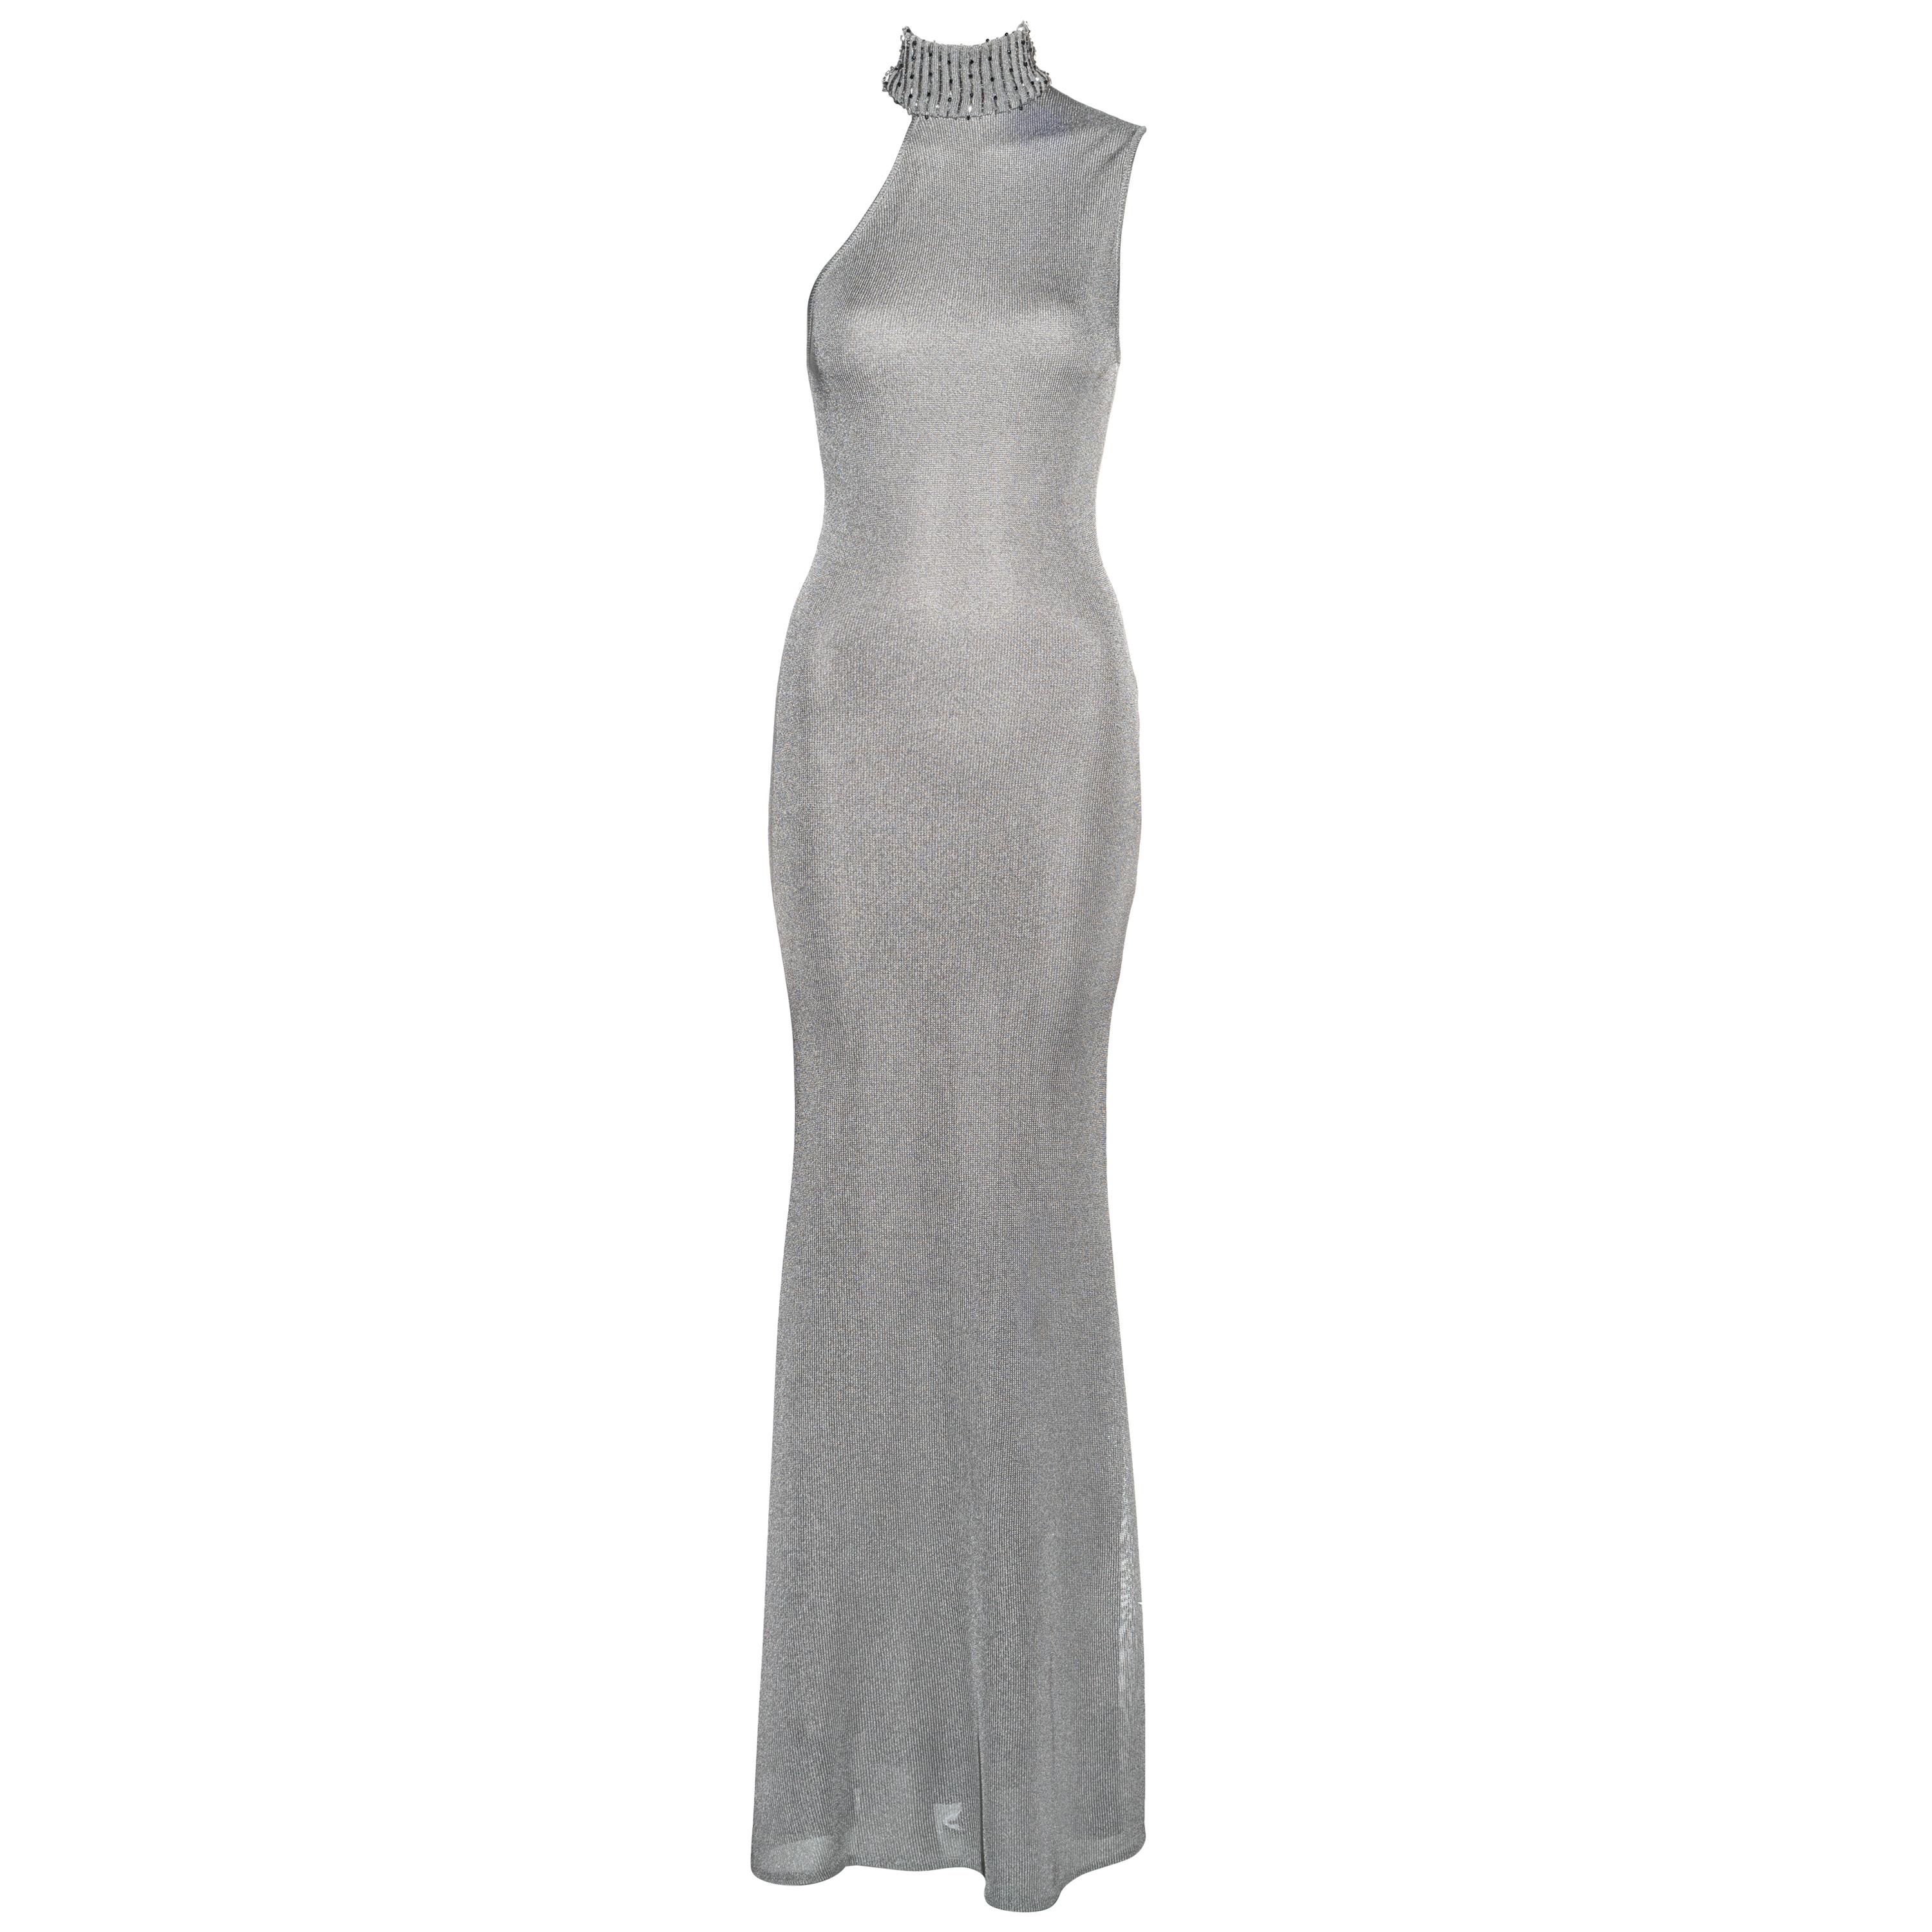 Gianni Versace silver knitted rayon evening dress, fw 1996